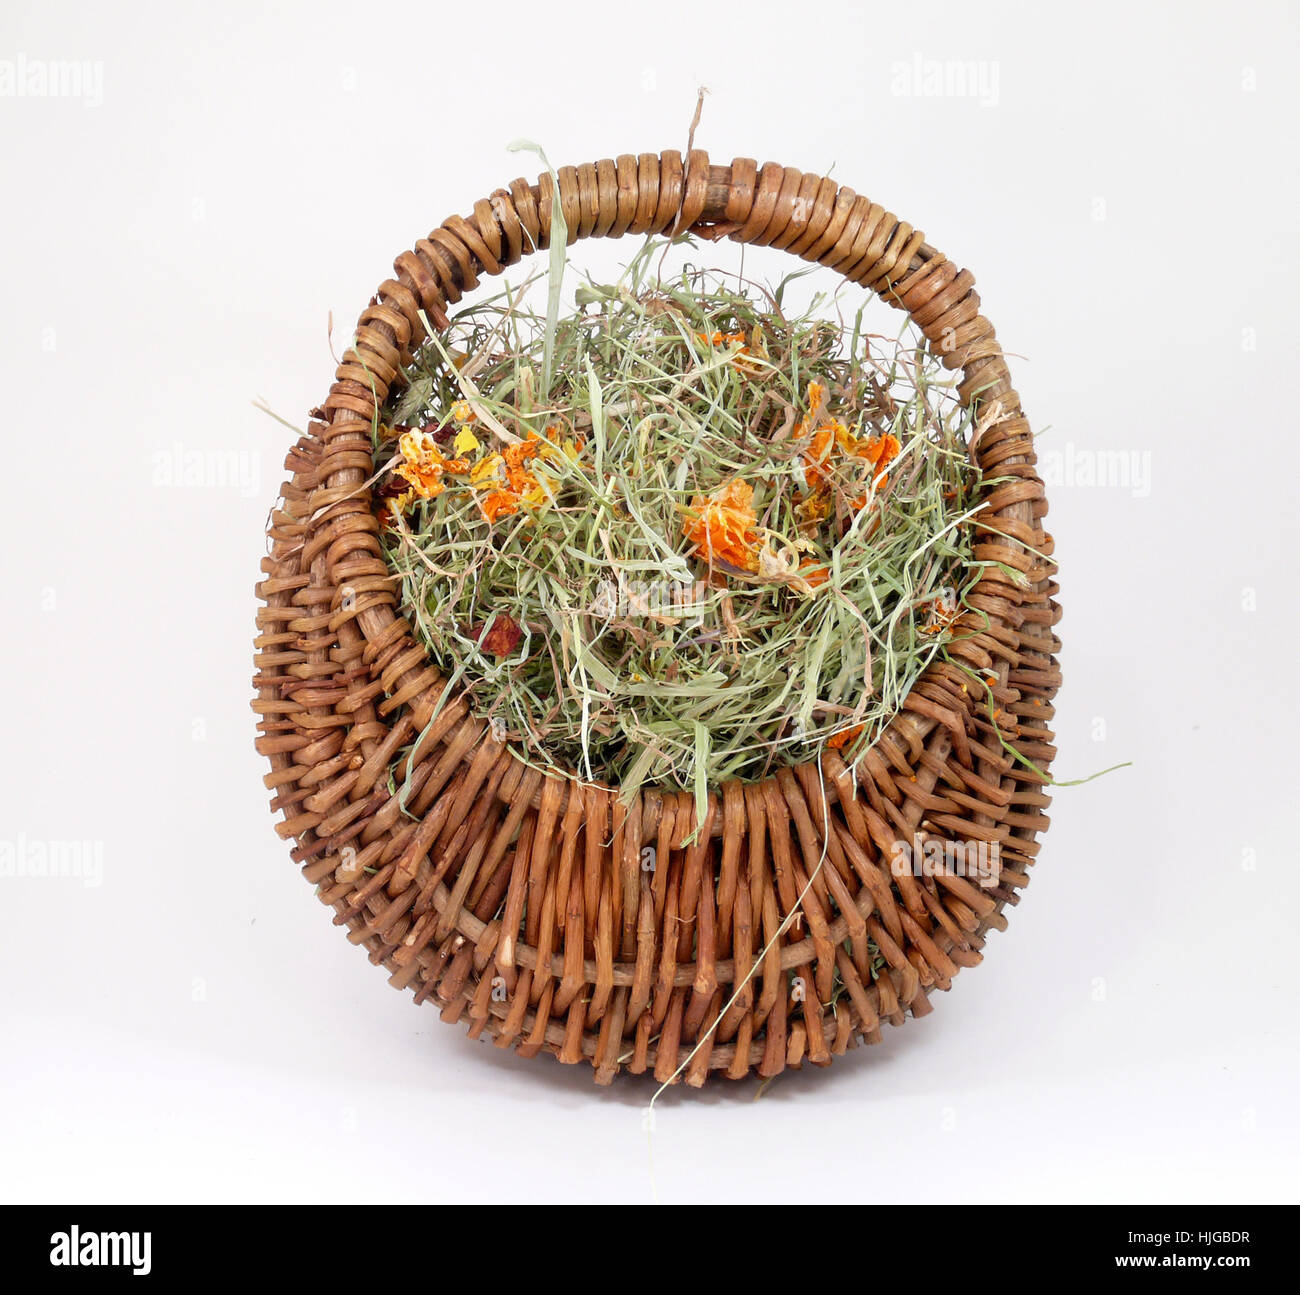 basket, hay, wicker basket, collect, meadow, grass, lawn, green, collecting, Stock Photo